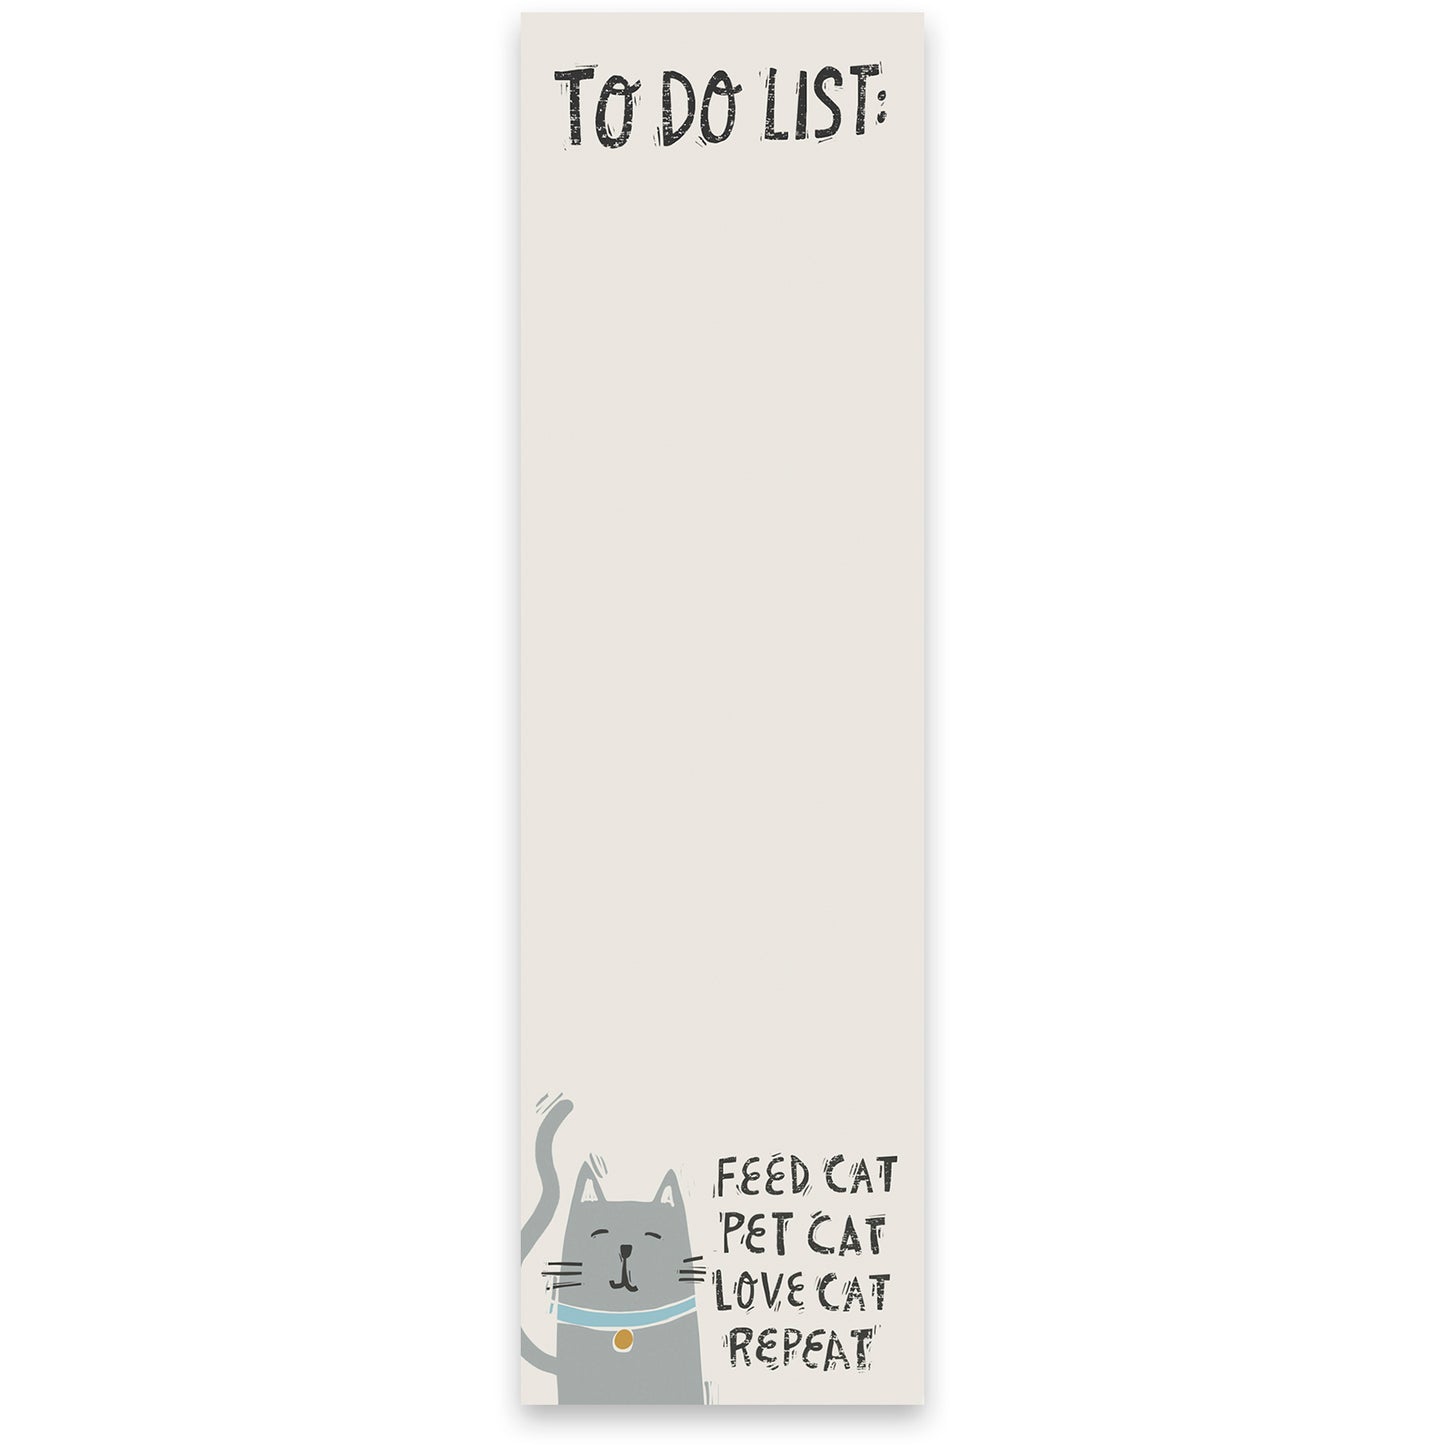 List Notepad-To Do List